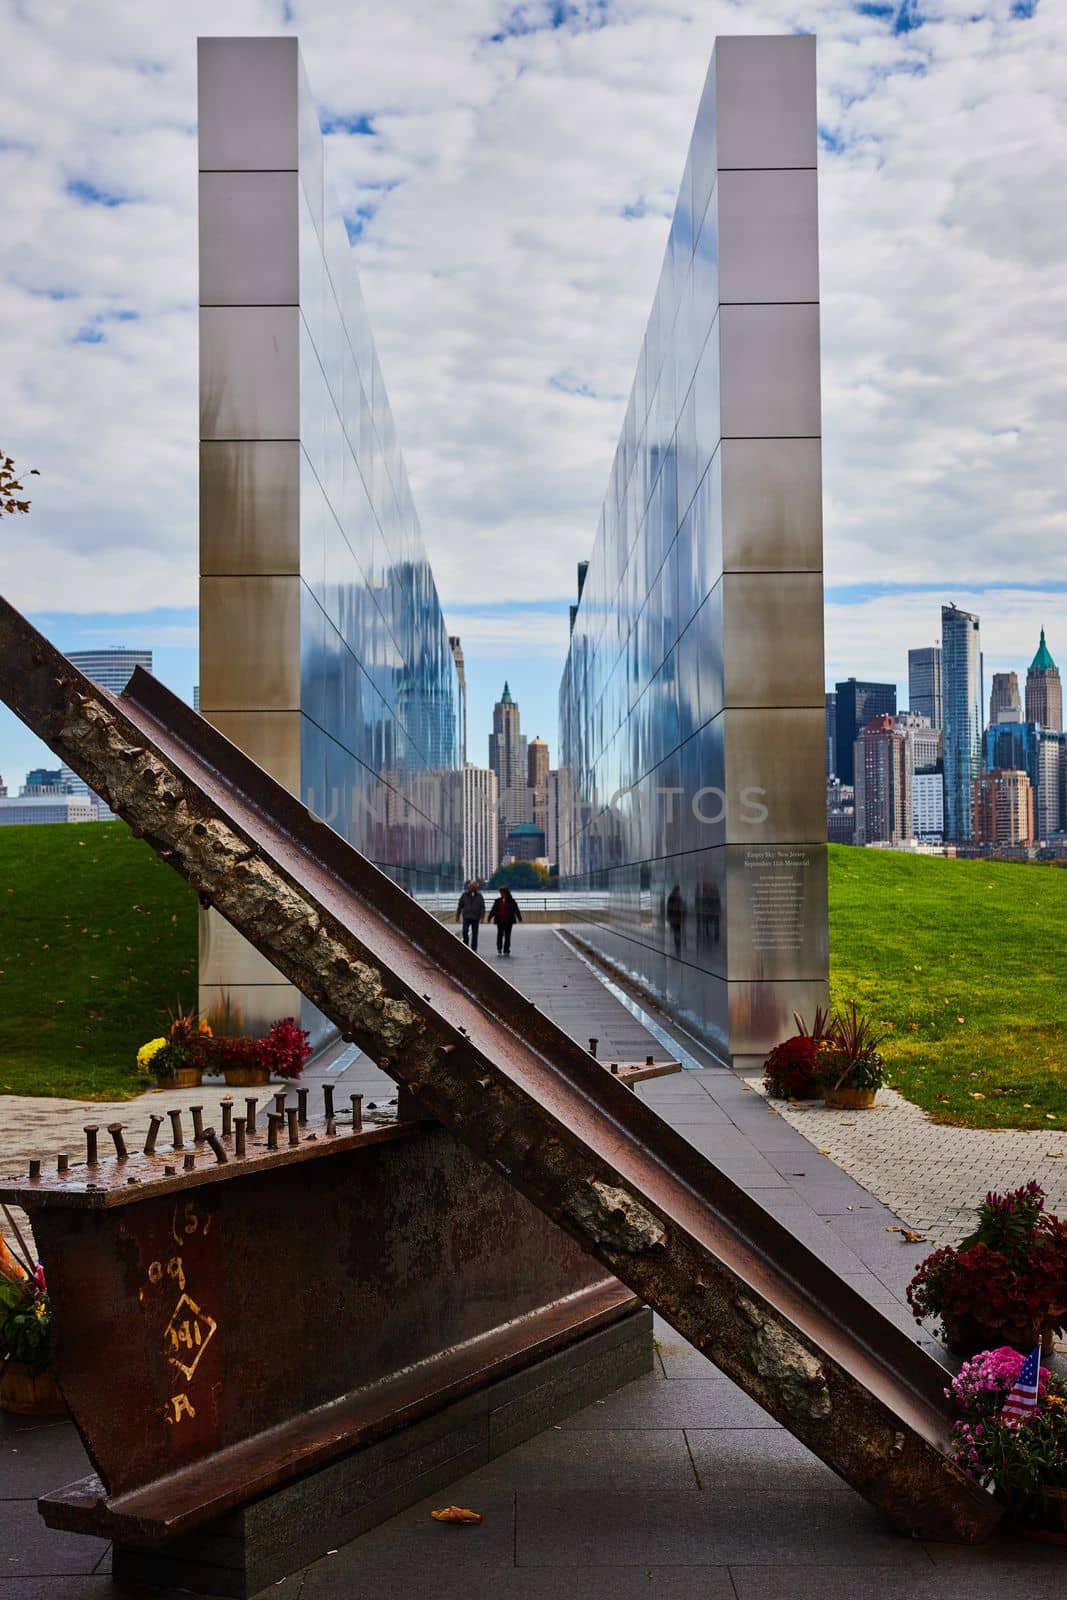 Piece of collapsed steel beam from 9 11 Twin Towers at New Jersey memorial overlooking New York City by njproductions